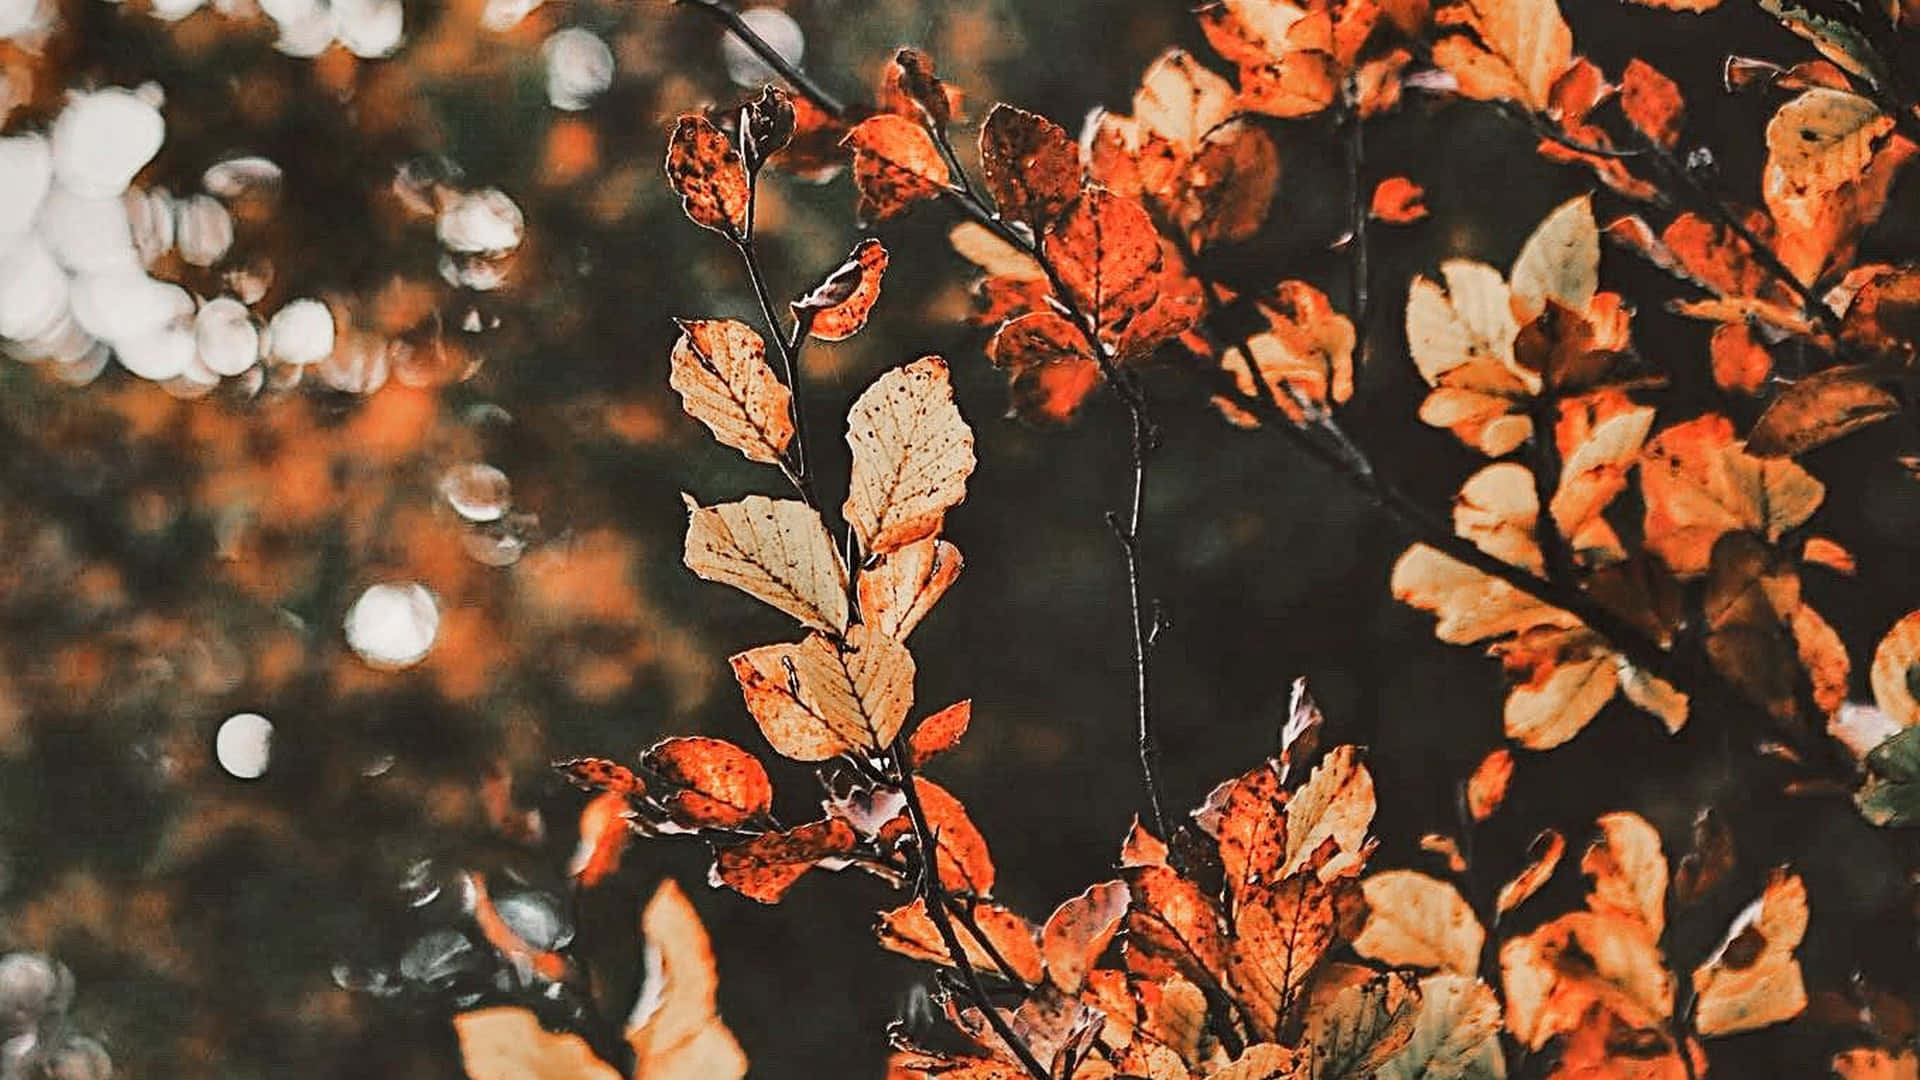 Enjoy a cozy Fall with a beautiful aesthetic background